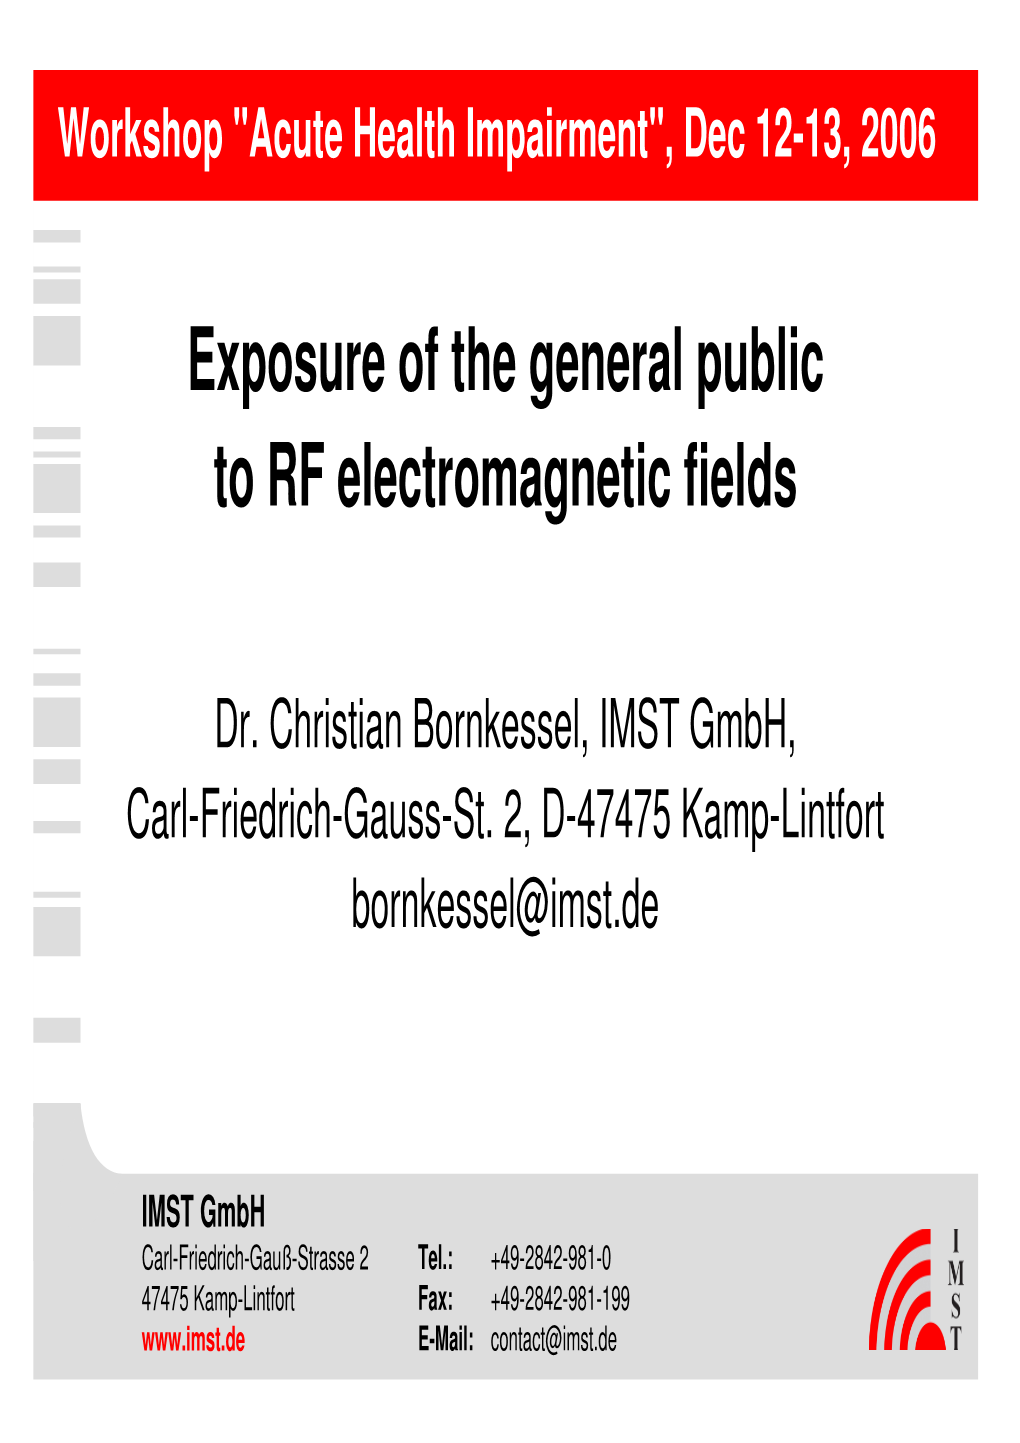 Exposure of the General Public to RF Electromagnetic Fields